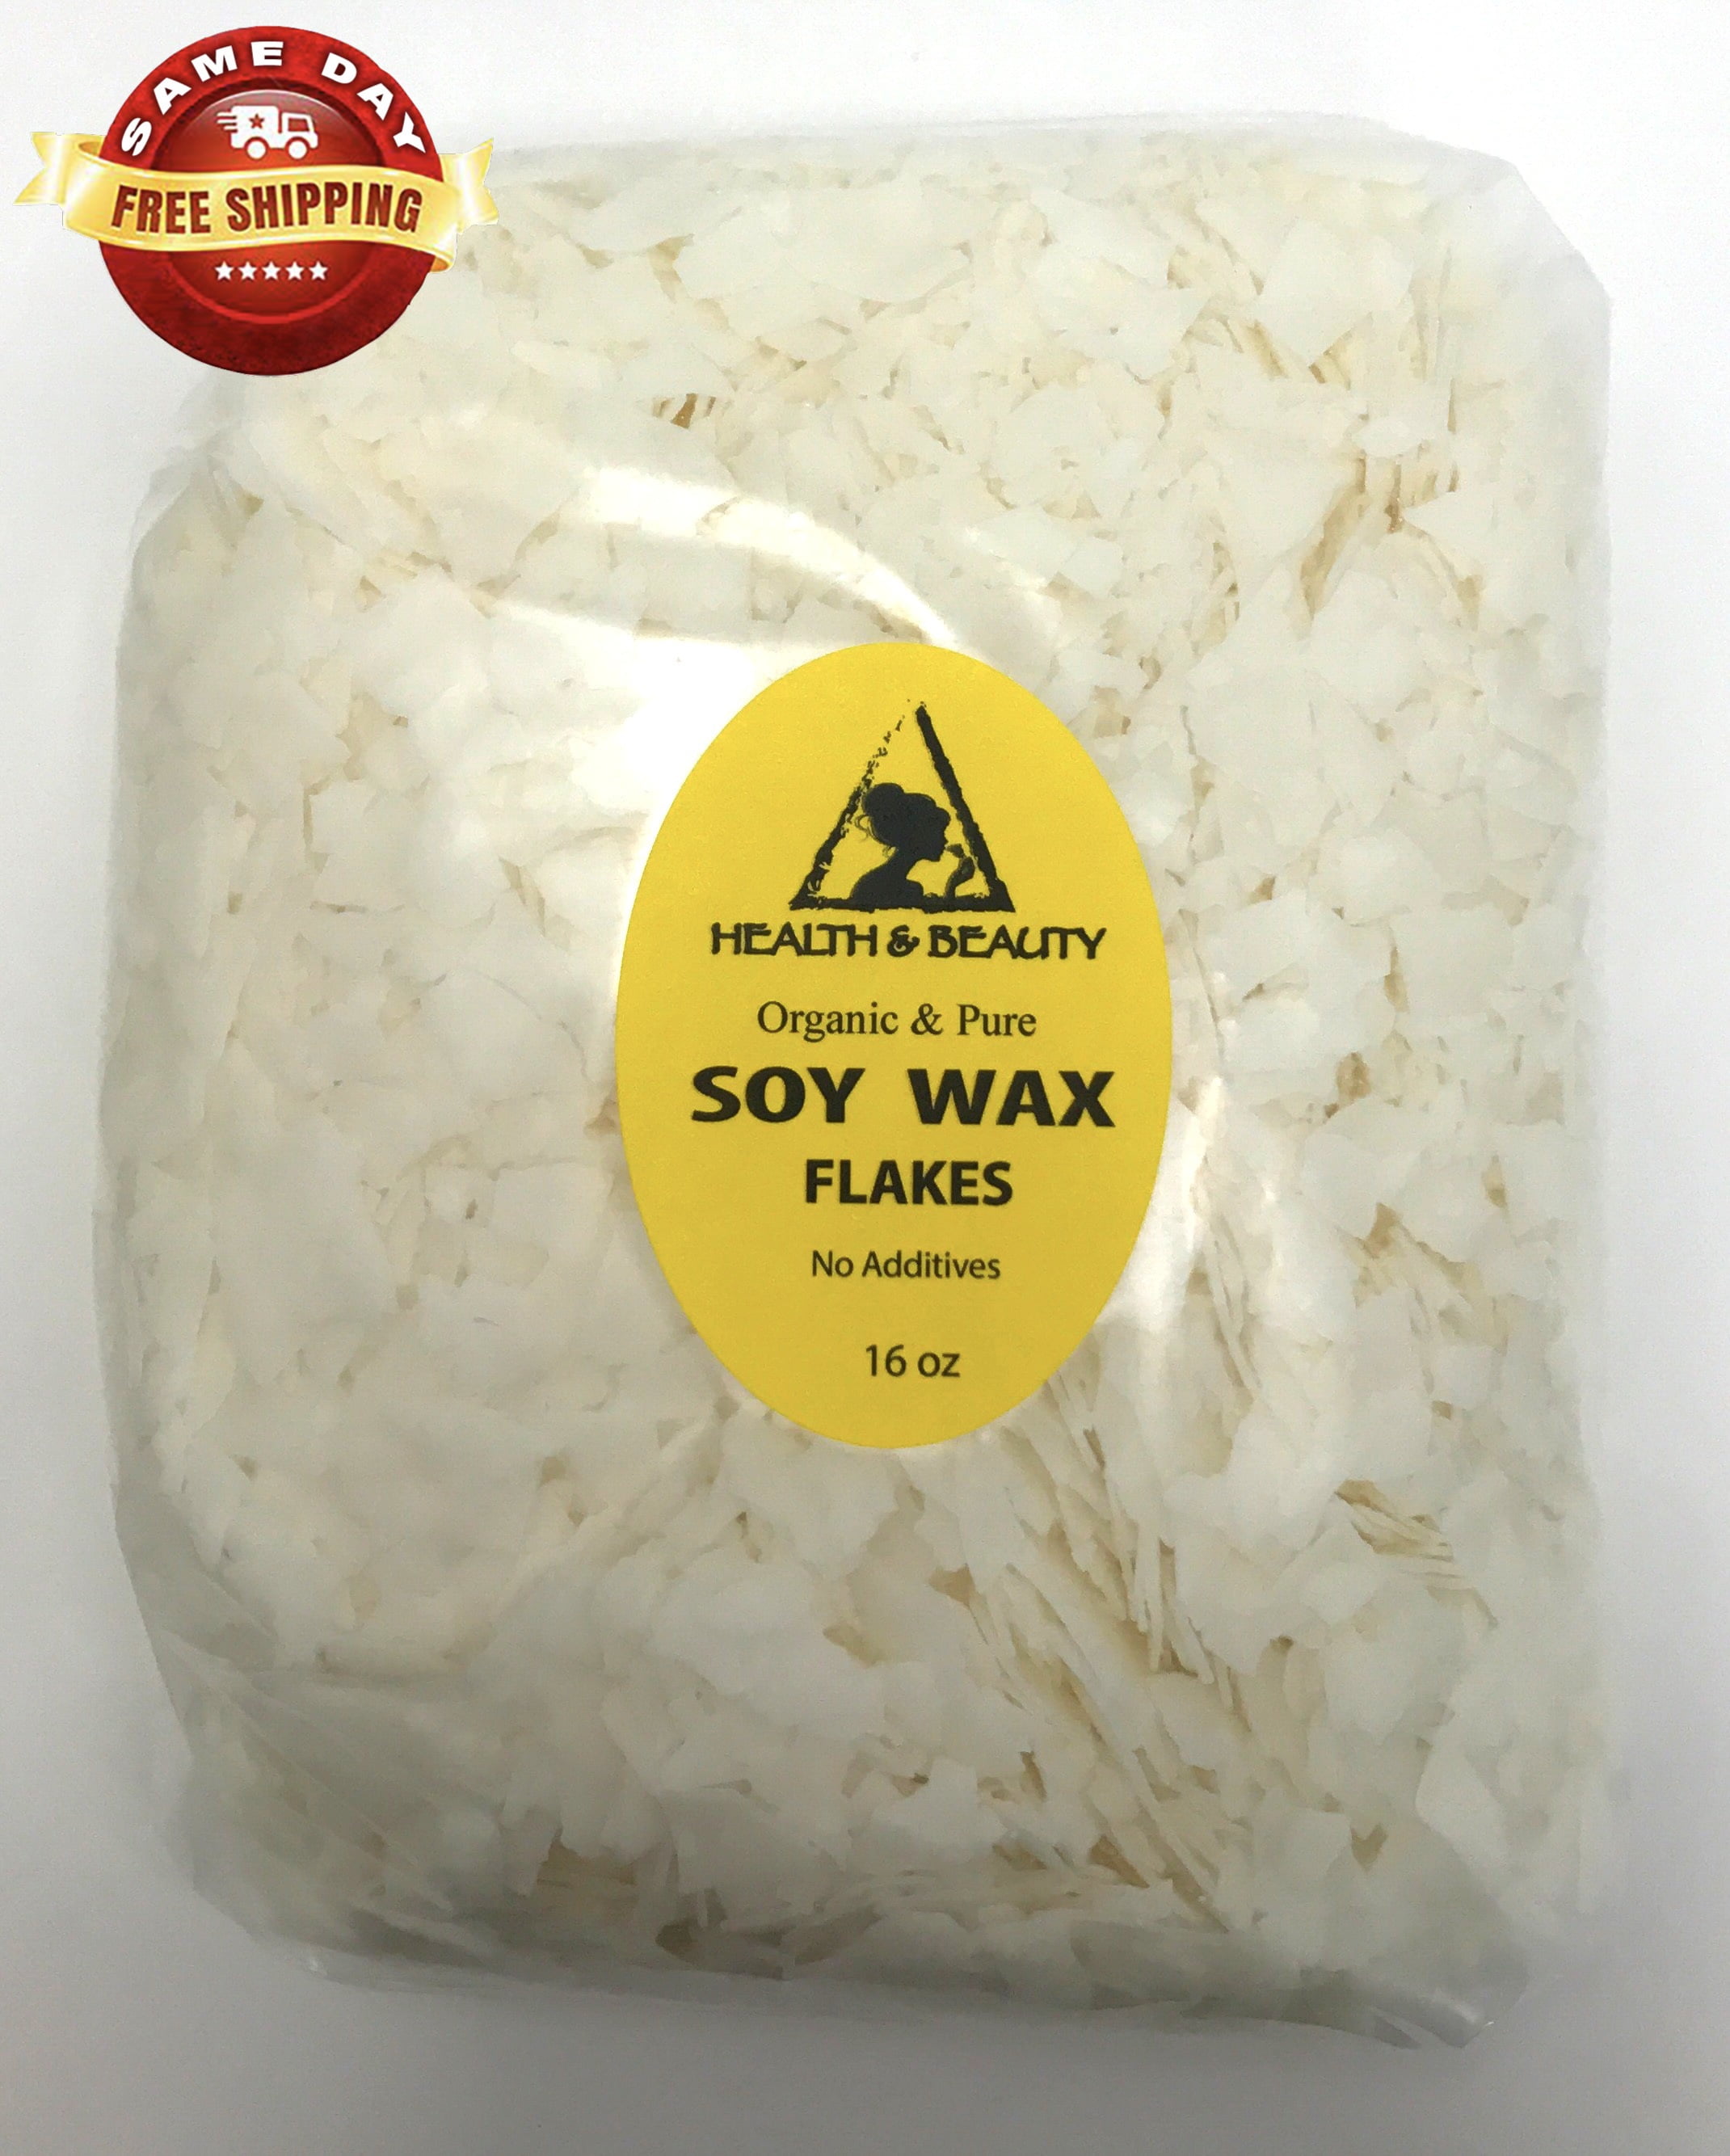 GOLDEN SOY AKOSOY WAX FLAKES ORGANIC VEGAN PASTILLES FOR CANDLE MAKING  NATURAL PURE 16 OZ 1 LB